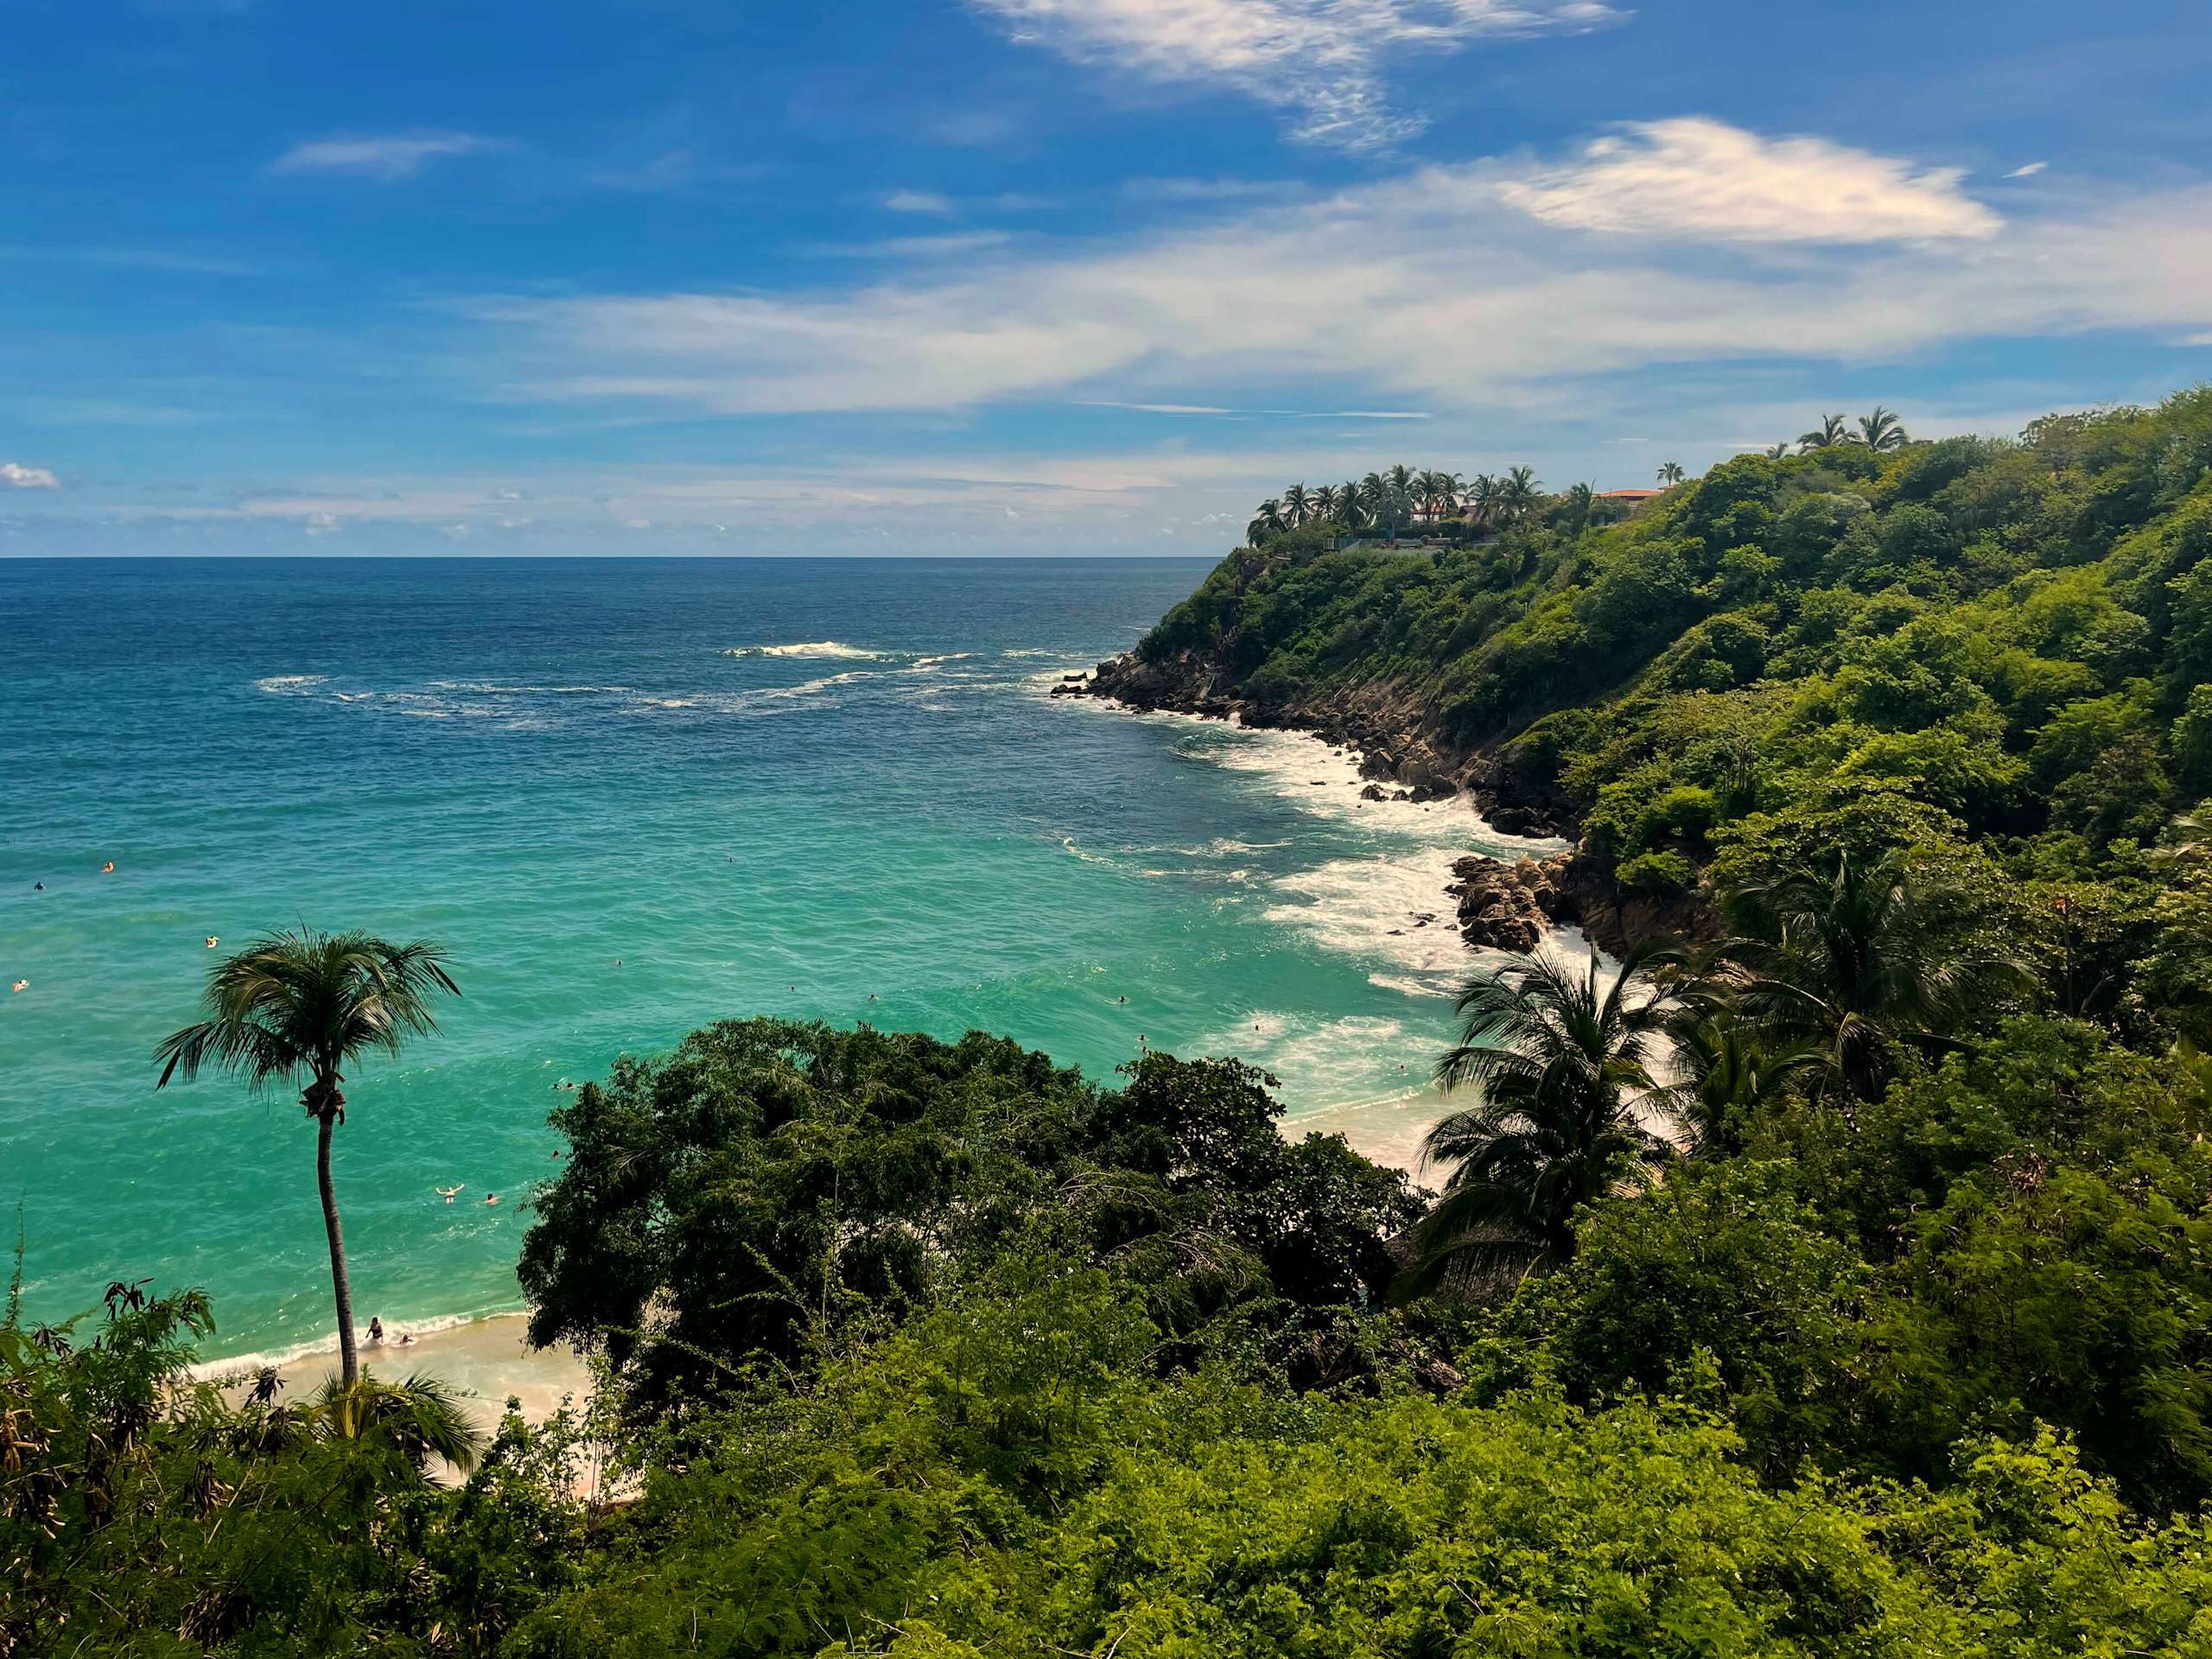 The Ideal Puerto Escondido Itinerary (3 Days, 4 Days, etc)